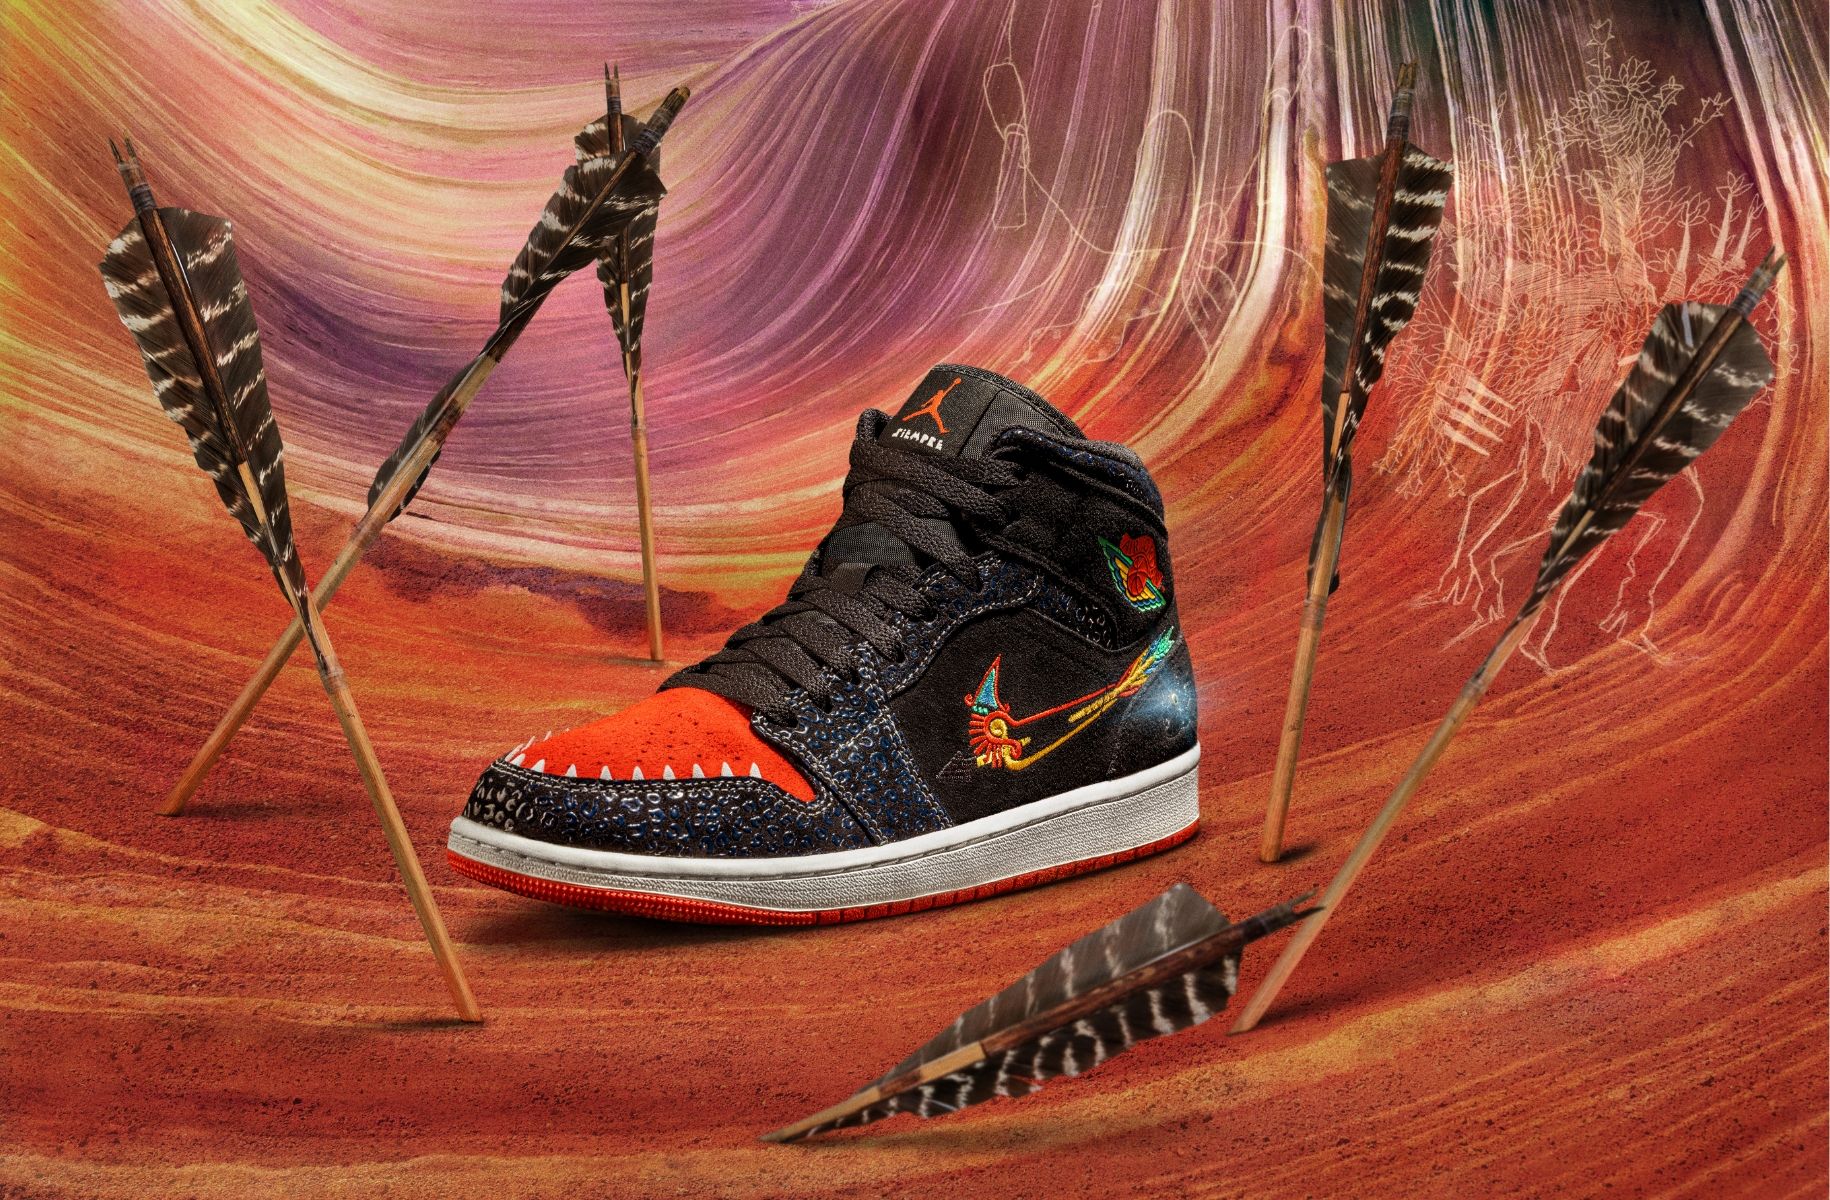 Nike Día de muertos sneaker against illustrated background an arrows embedded into ground